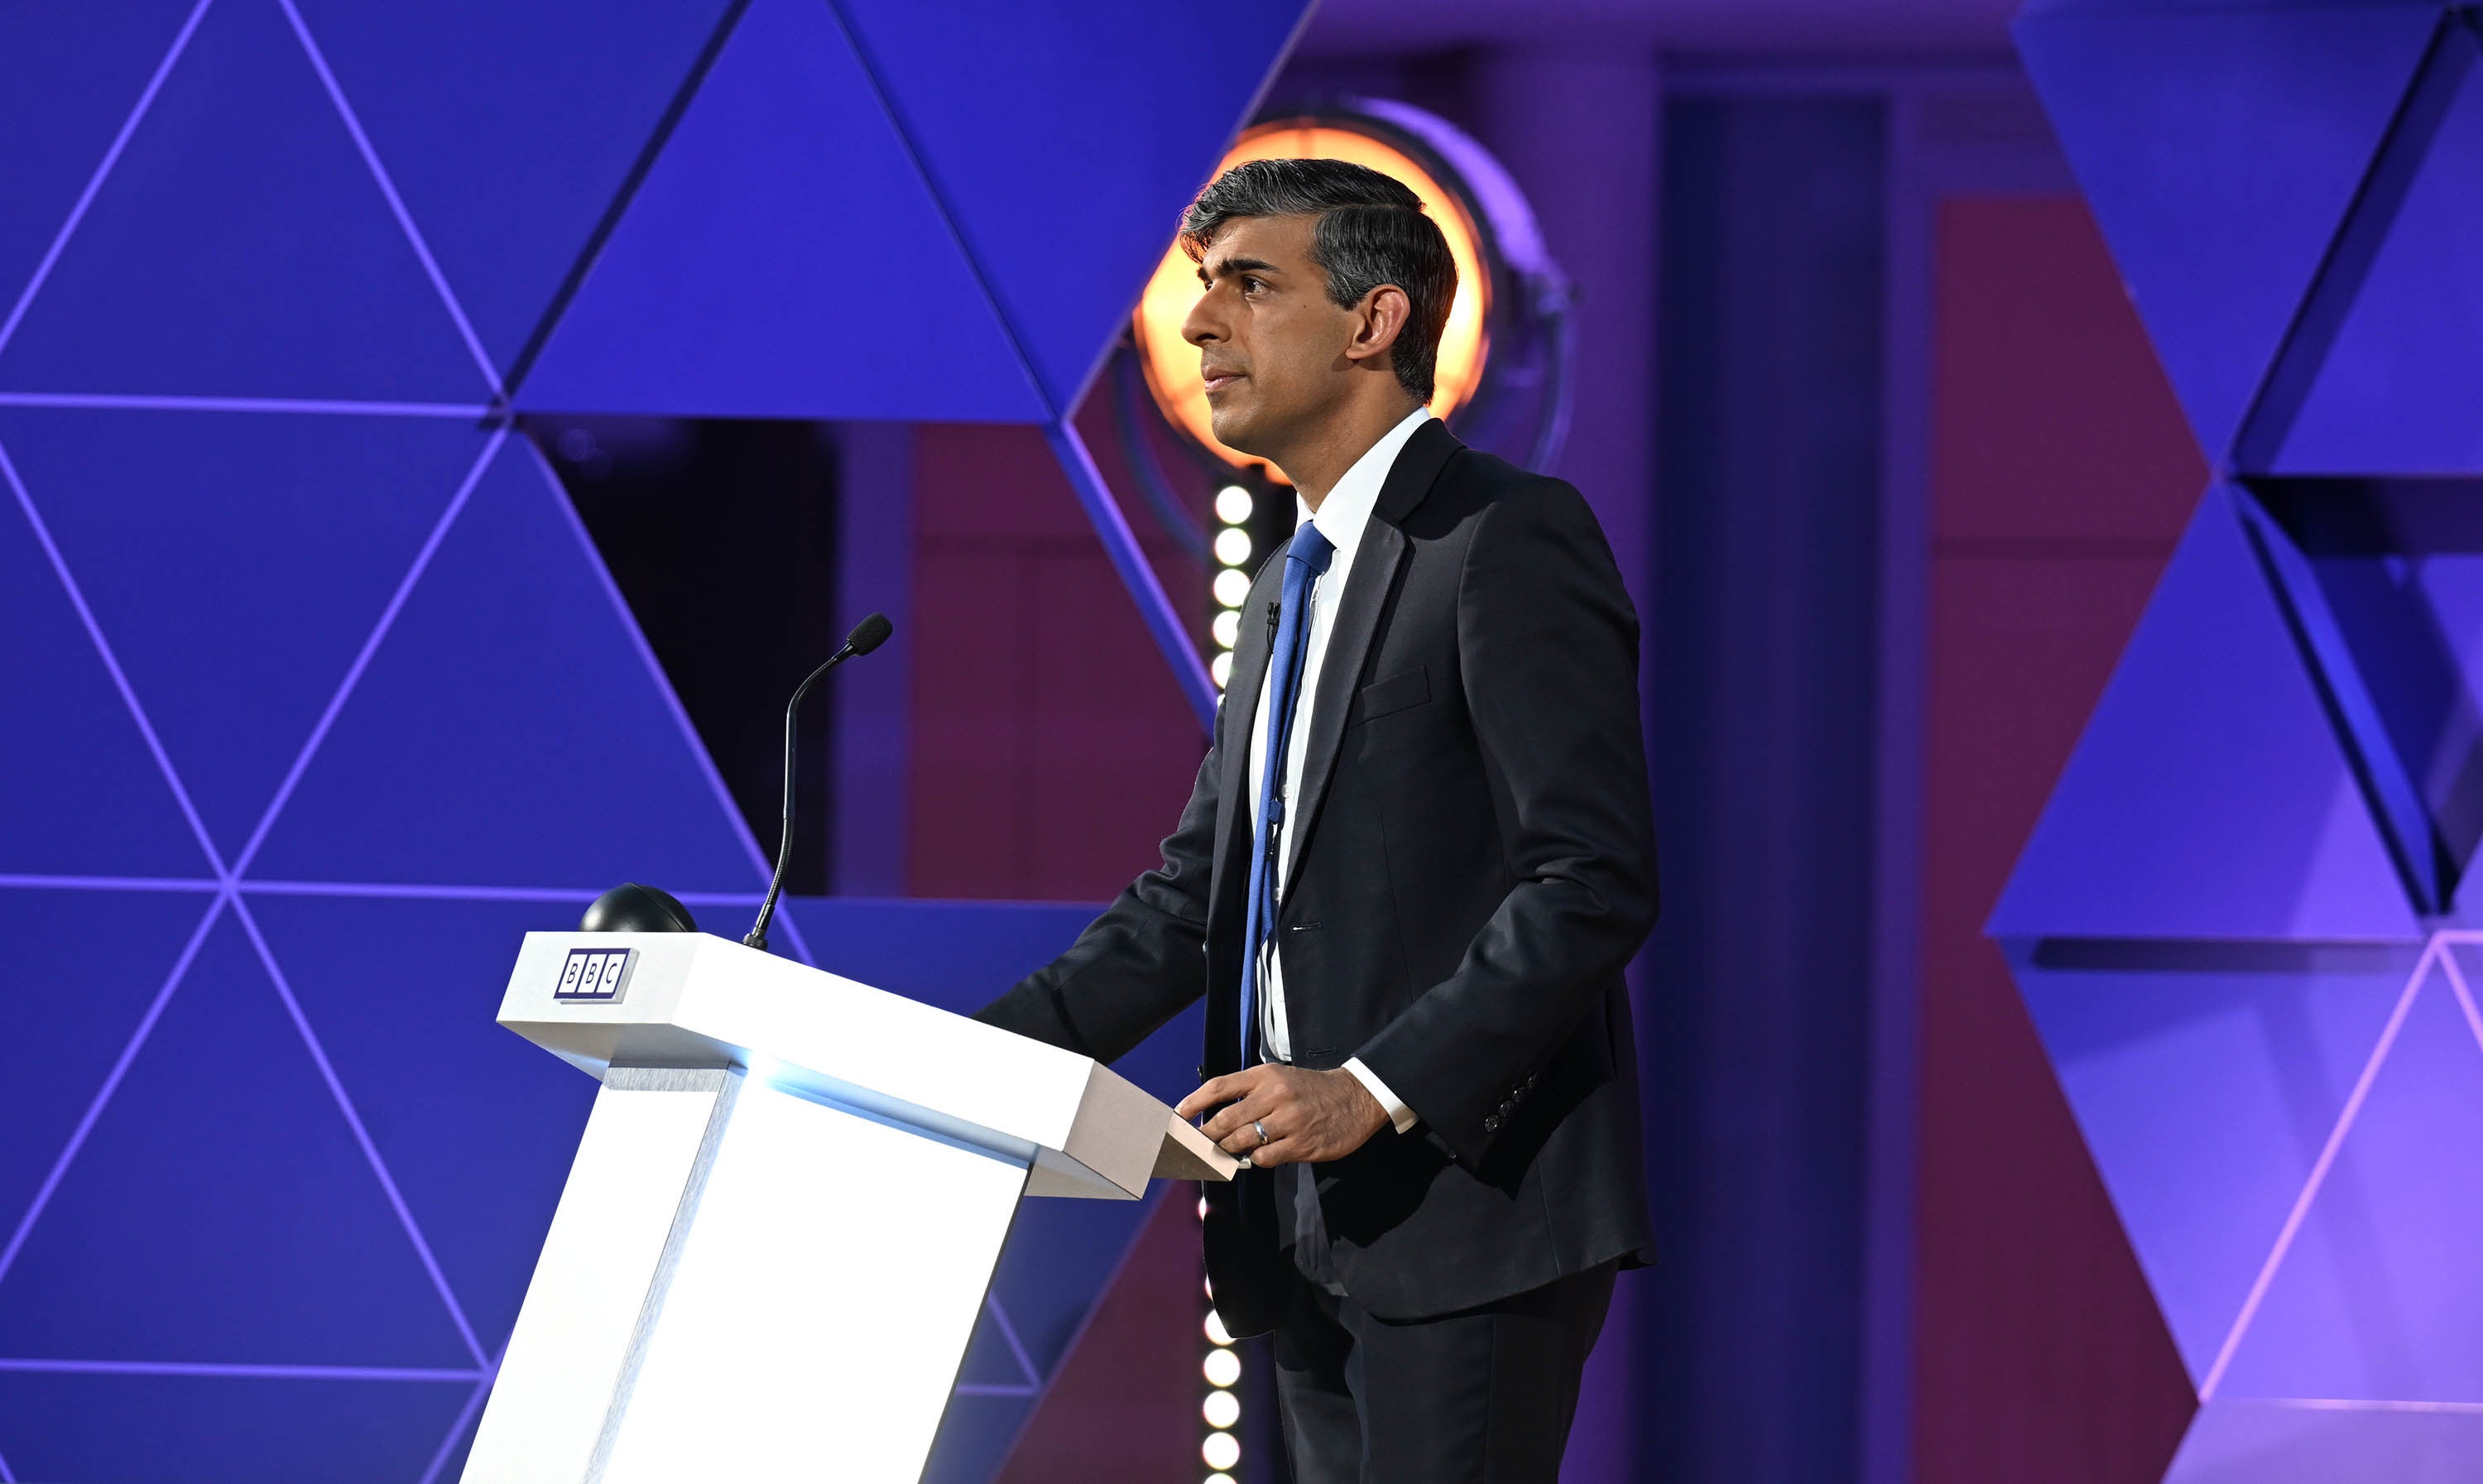 Prime Minister Rishi Sunak during the BBC head-to-head debate with Labour leader Sir Keir Starmer in Nottingham (Jeff Overs/BBC/PA)